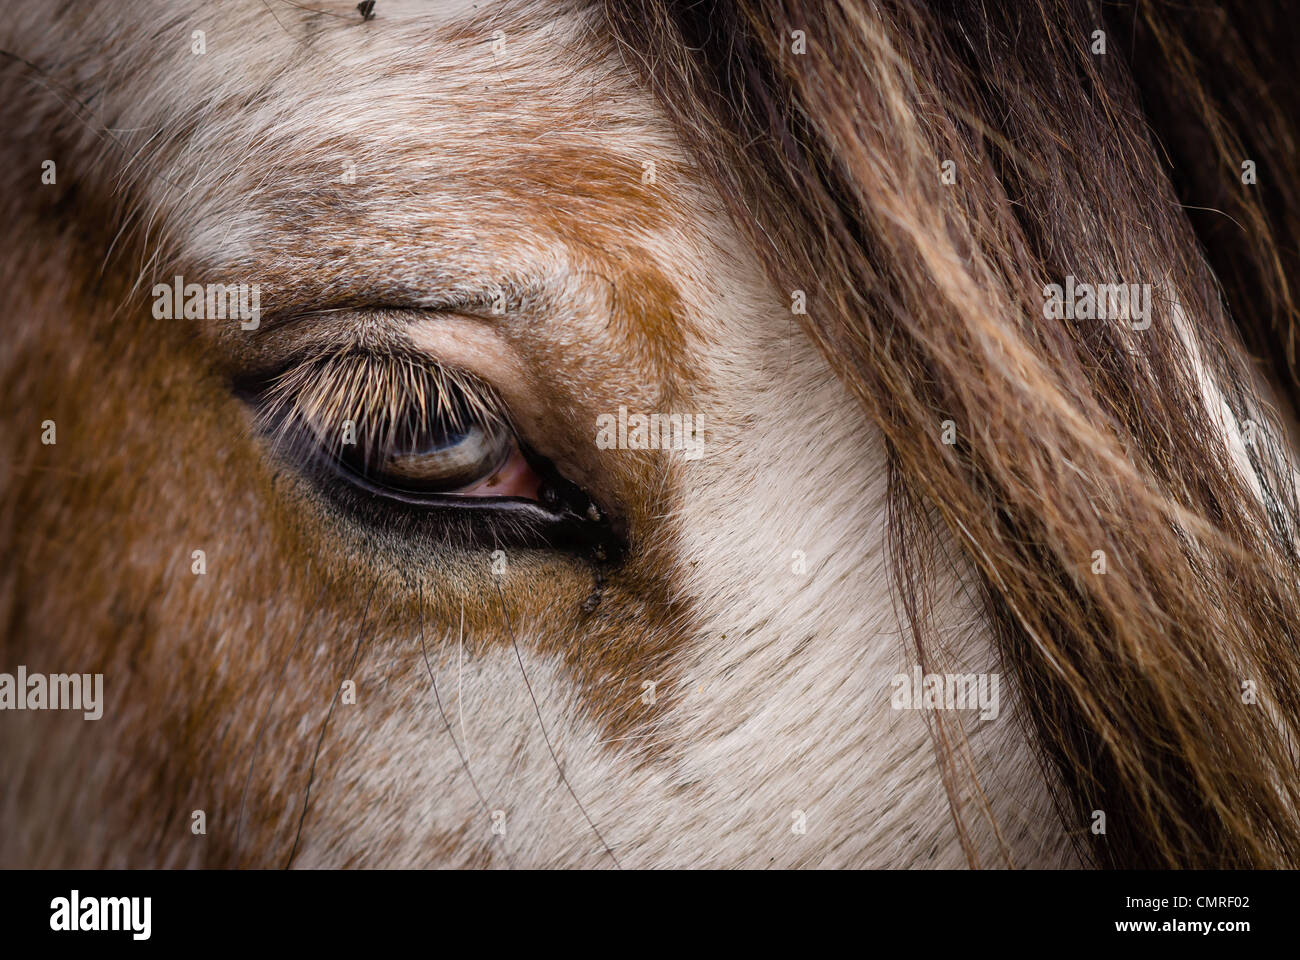 A pair of Clydesdale horses Stock Photo